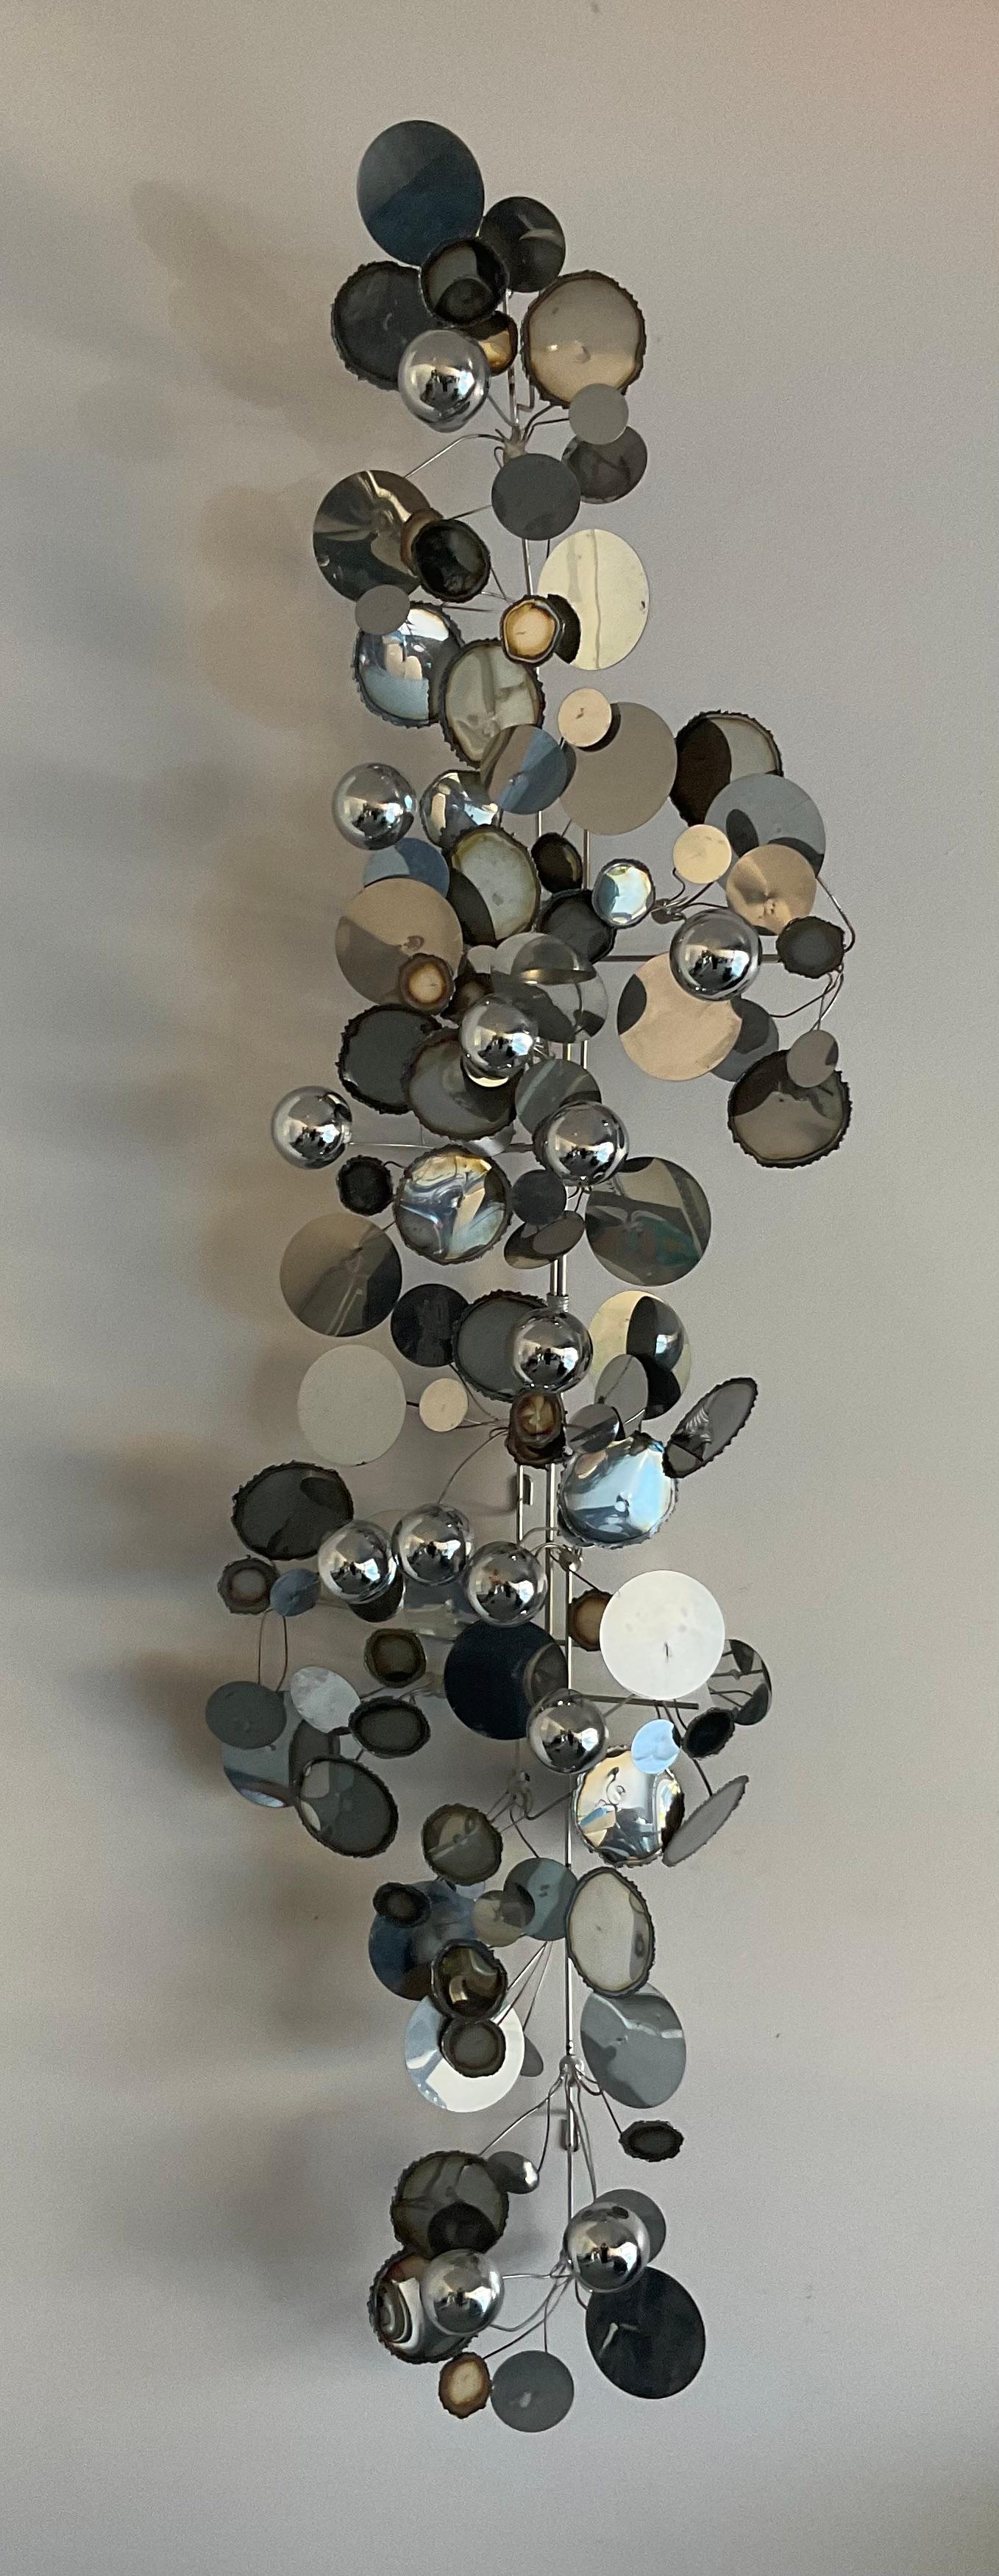 Curtis Jere Early Chrome Raindrops Sculpture Signed by the Artist circa 1970’s. This sculpture has beautiful patina and vibrant color and can can hang both vertically or horizontally depending on your interior needs. 